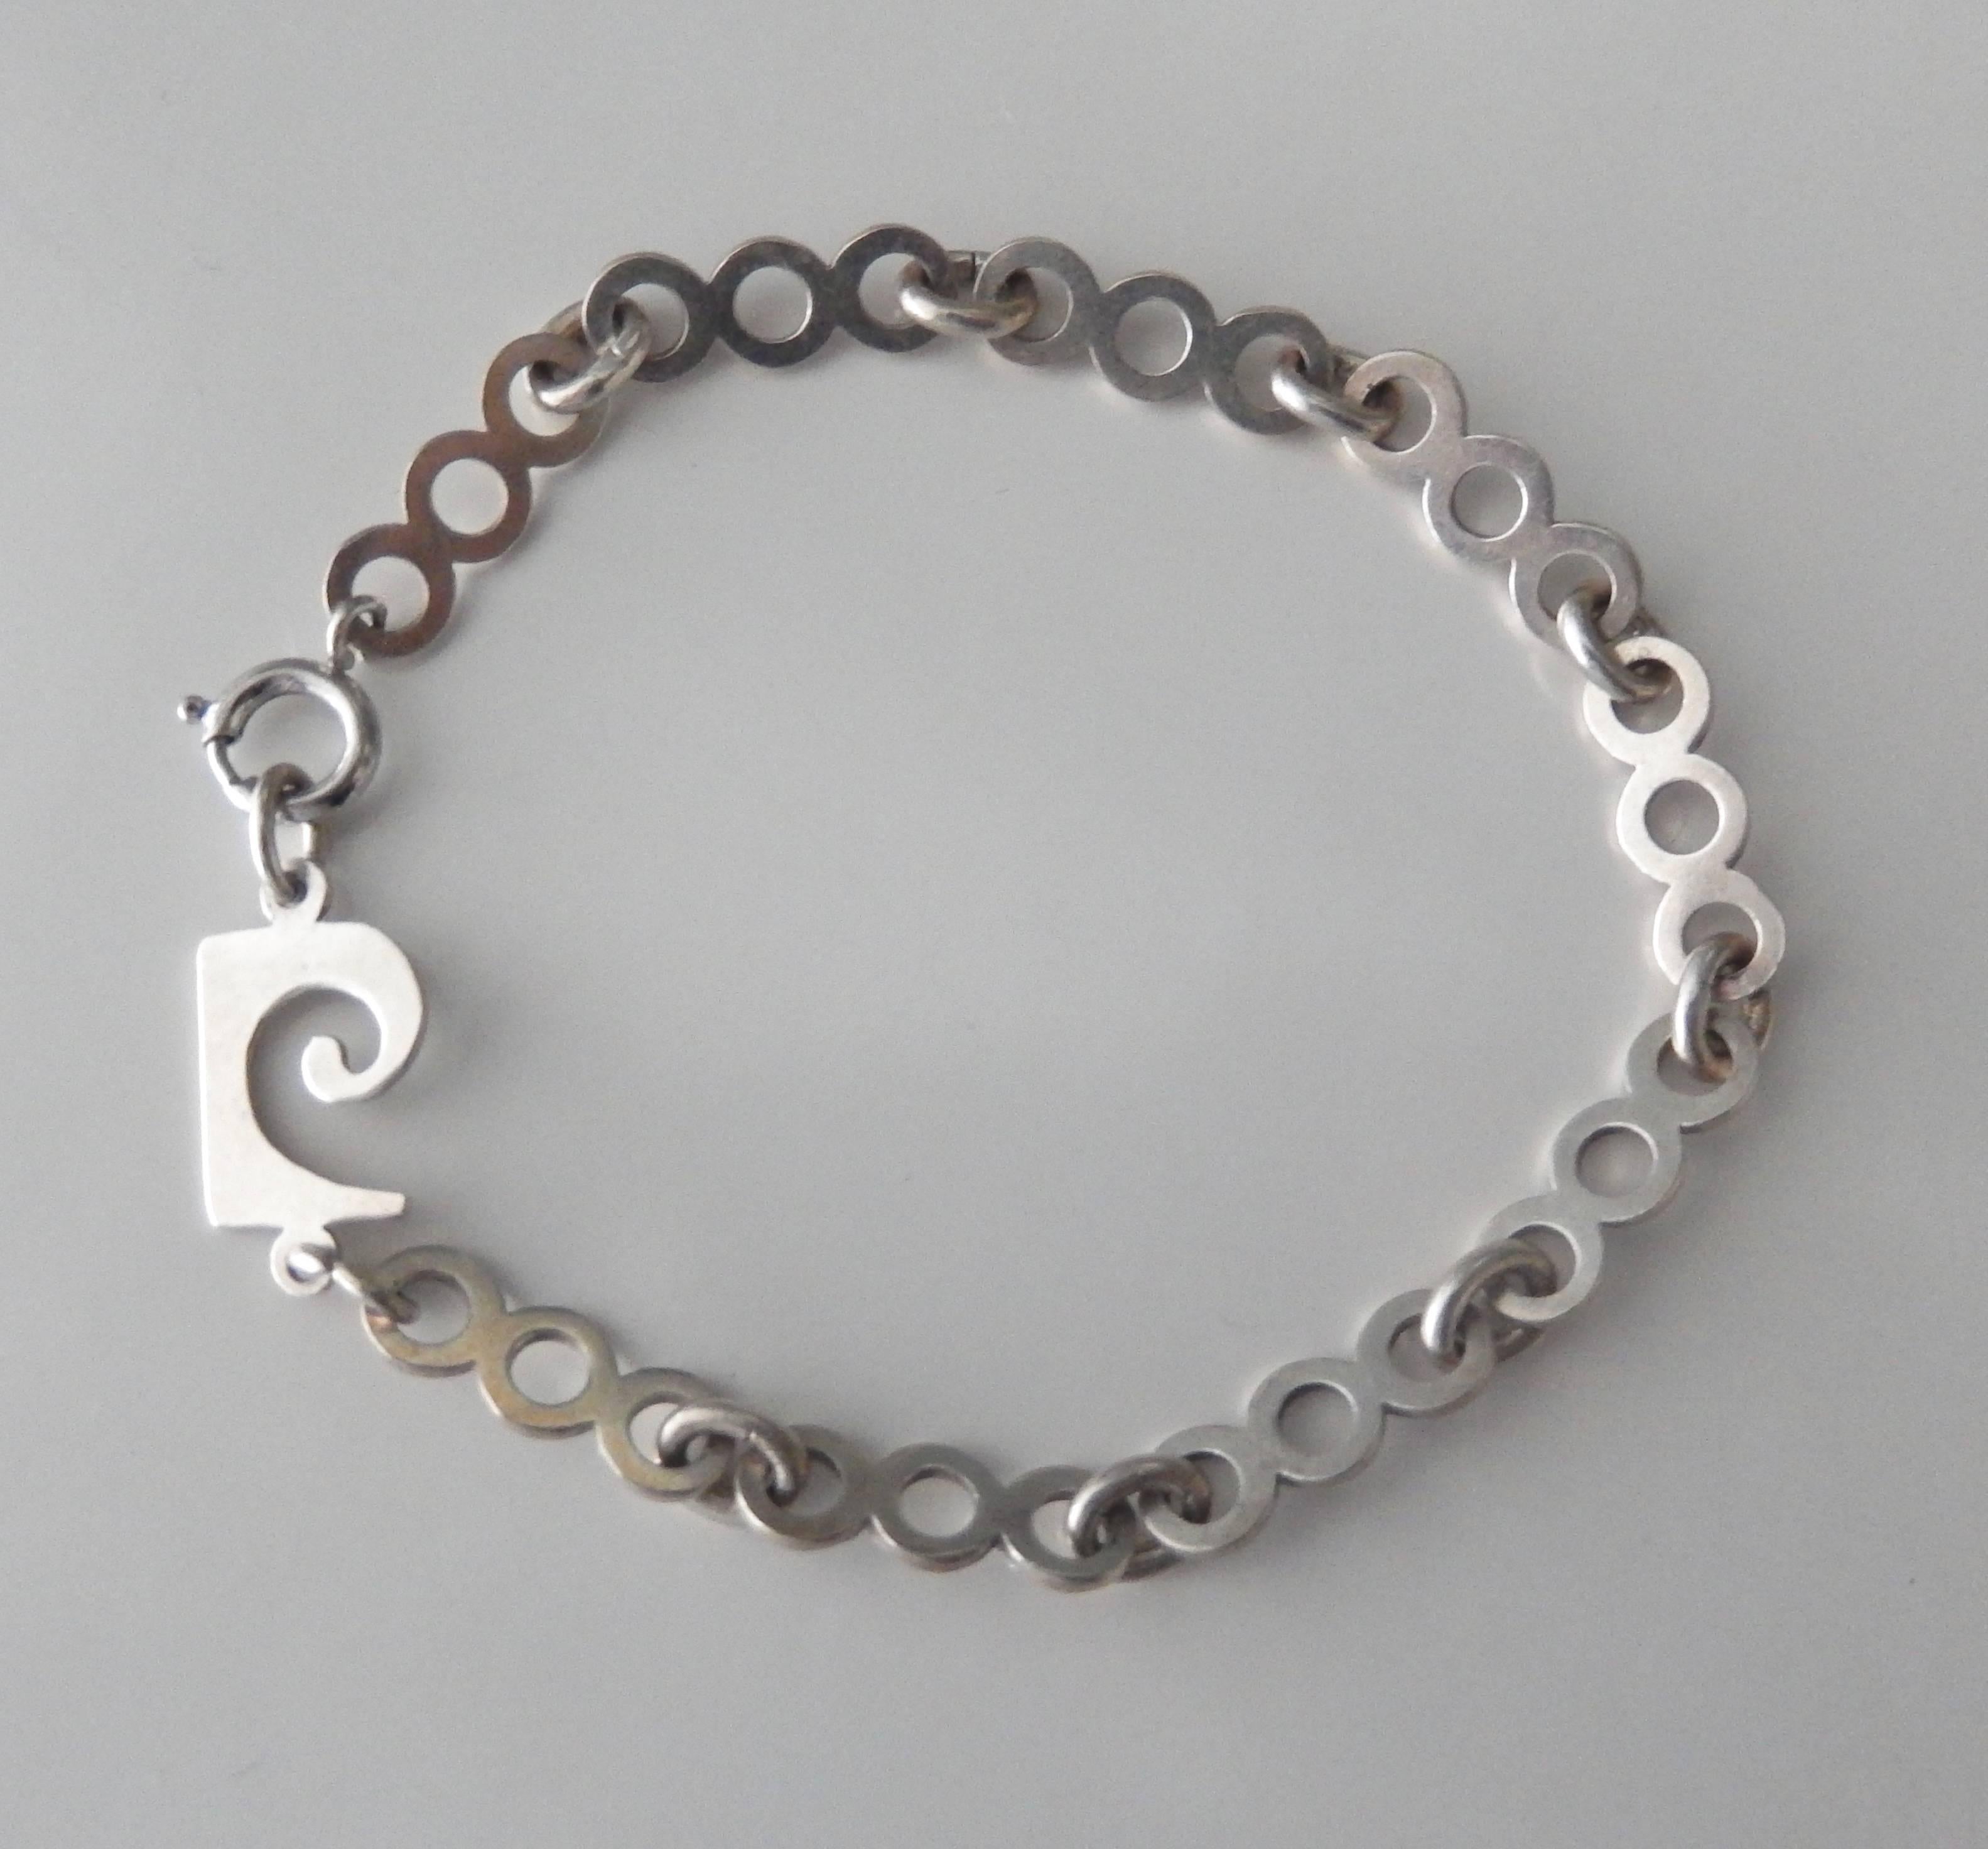 A sterling silver link bracelet by the pioneering modernist Pierre Cardin.  Comprised of geometric links, the bracelet has a minimal, futuristic, 70s design.
Marked: Pierre Cardin  STERLING   Comfortable fit for a small to medium sized wrist.